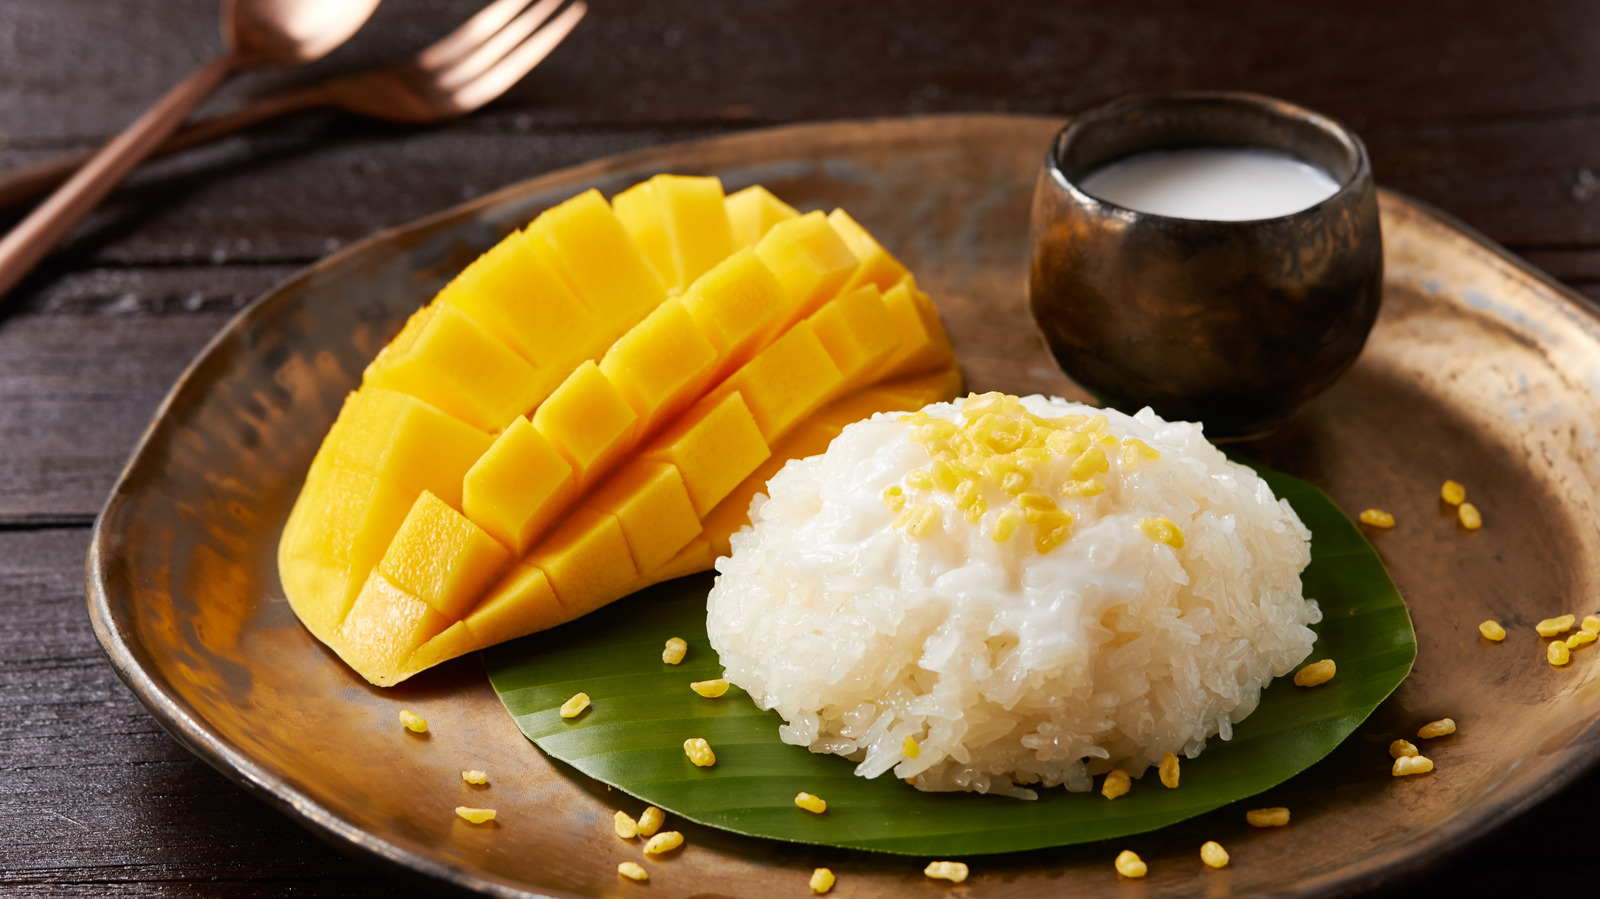 https://www.mashed.com/img/gallery/the-secret-to-making-sticky-rice-in-a-rice-cooker/l-intro-1607014879.jpg